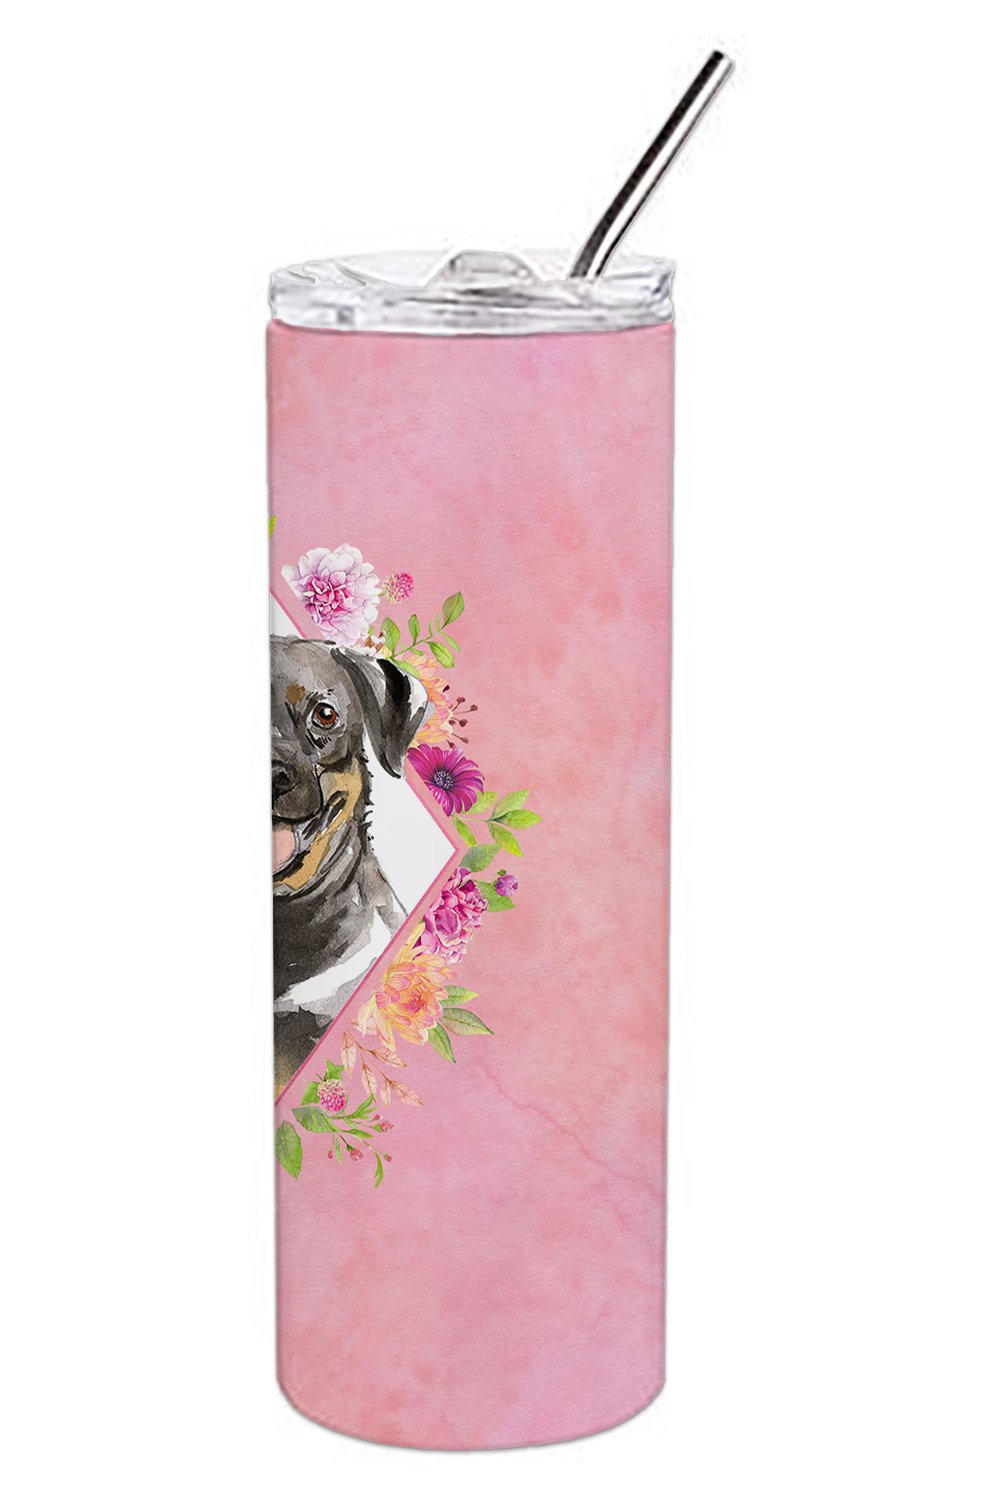 Rottweiler Pink Flowers Double Walled Stainless Steel 20 oz Skinny Tumbler CK4217TBL20 by Caroline's Treasures